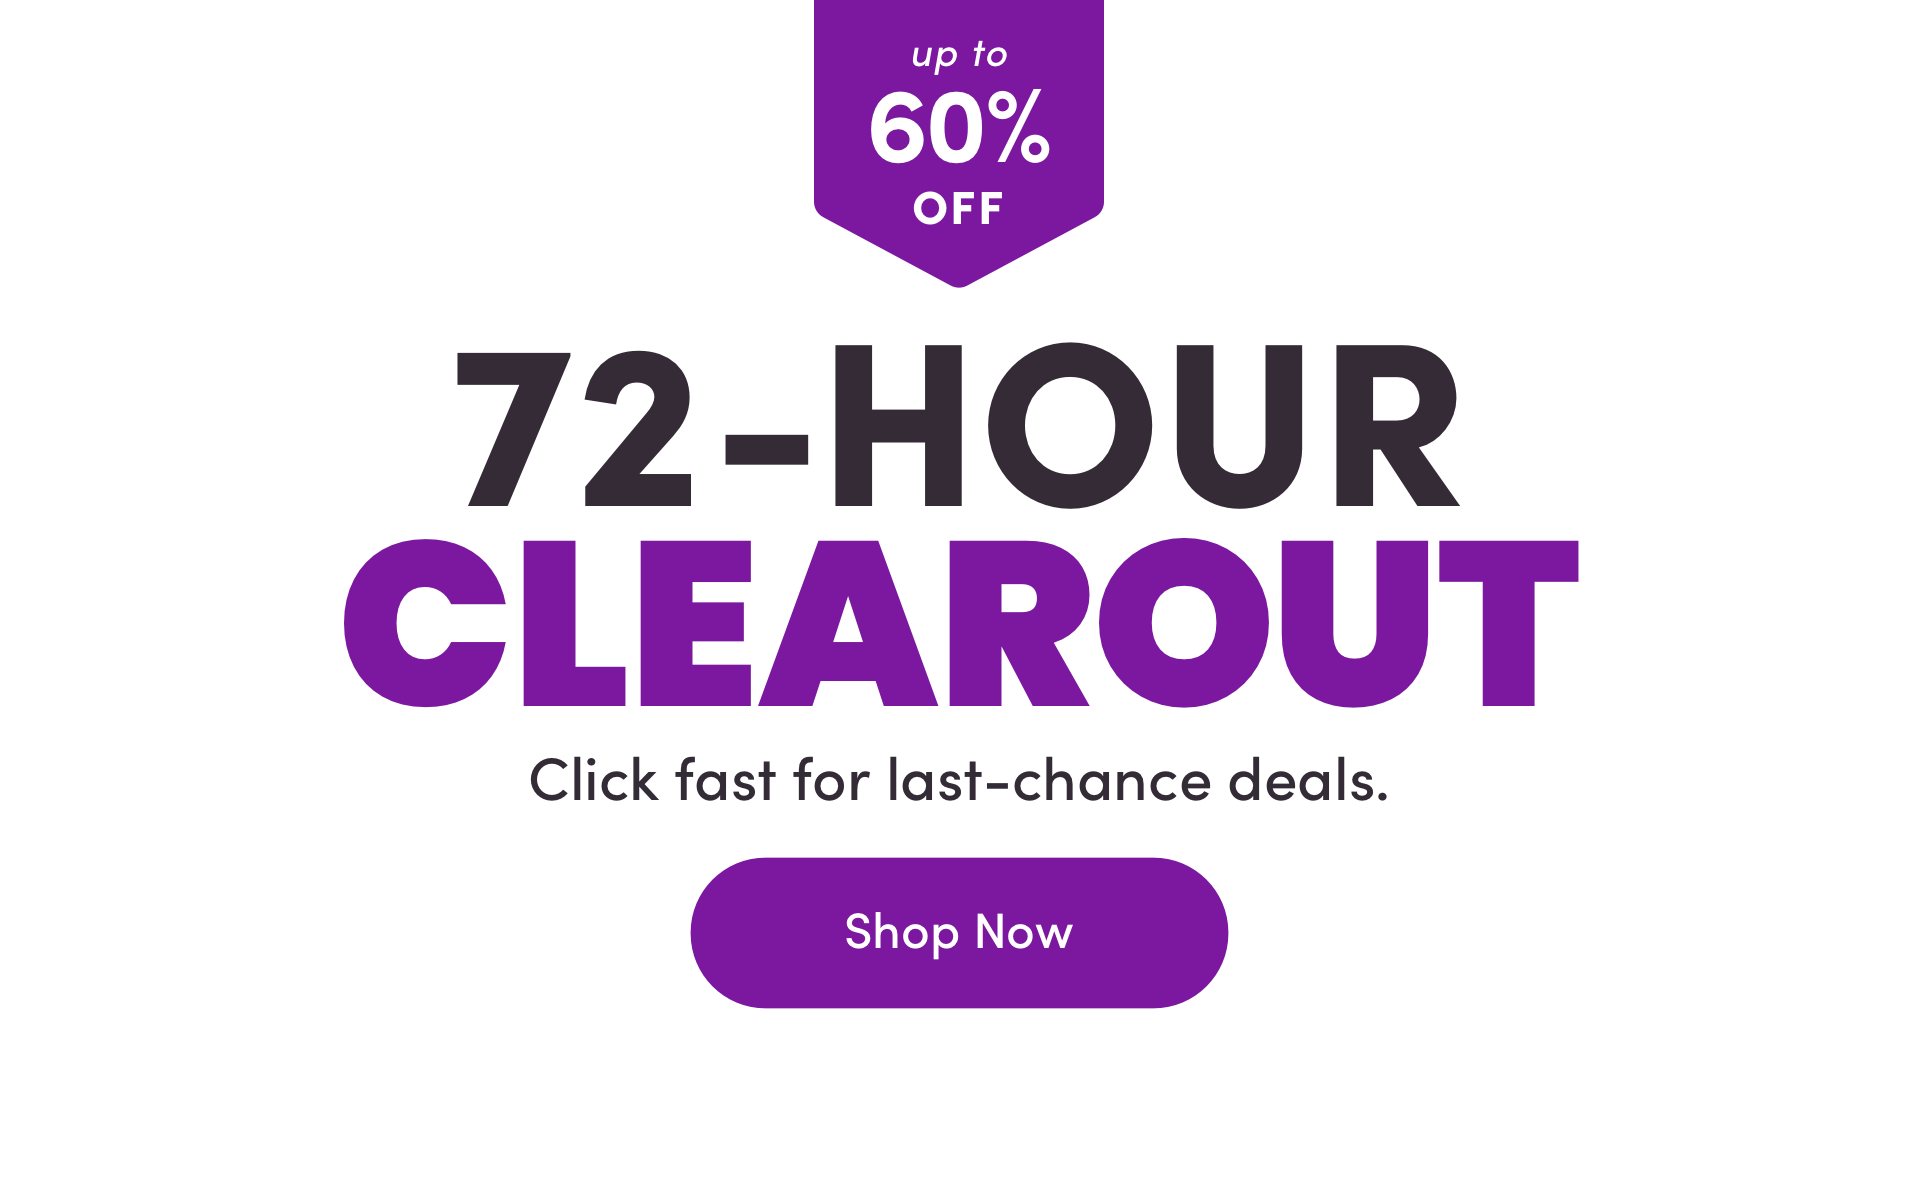 up to 60% OFF 72-HOUR CLEAROUT Click fast for last-chance deals. Shop Now